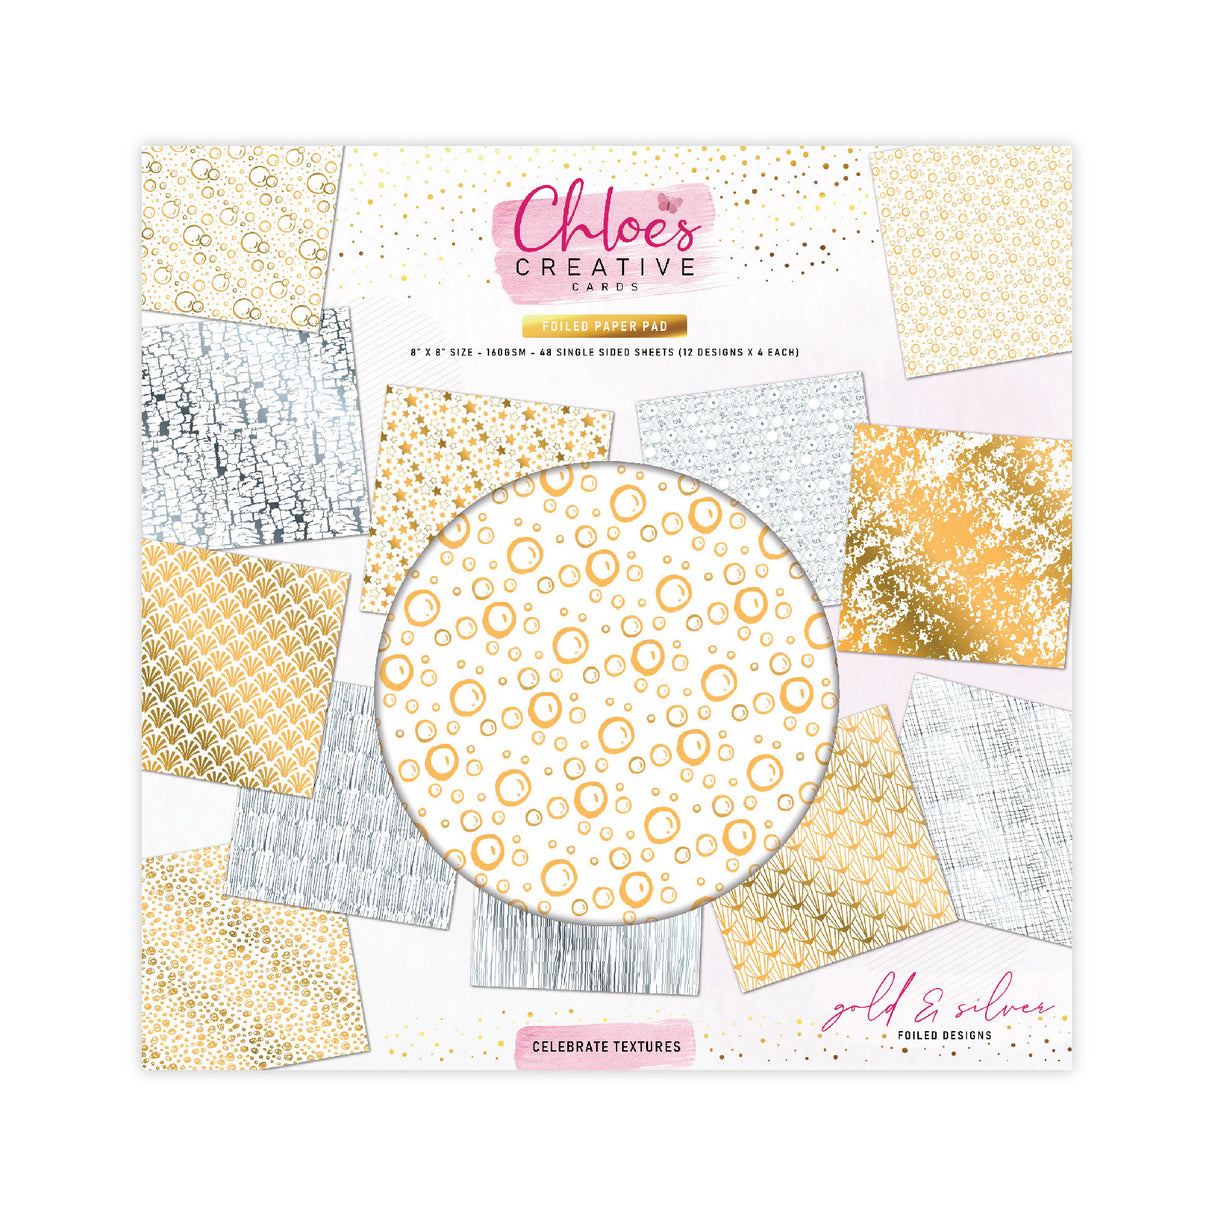 Chloes Creative Cards Foiled Paper Pad (8x8) Celebrate Textures